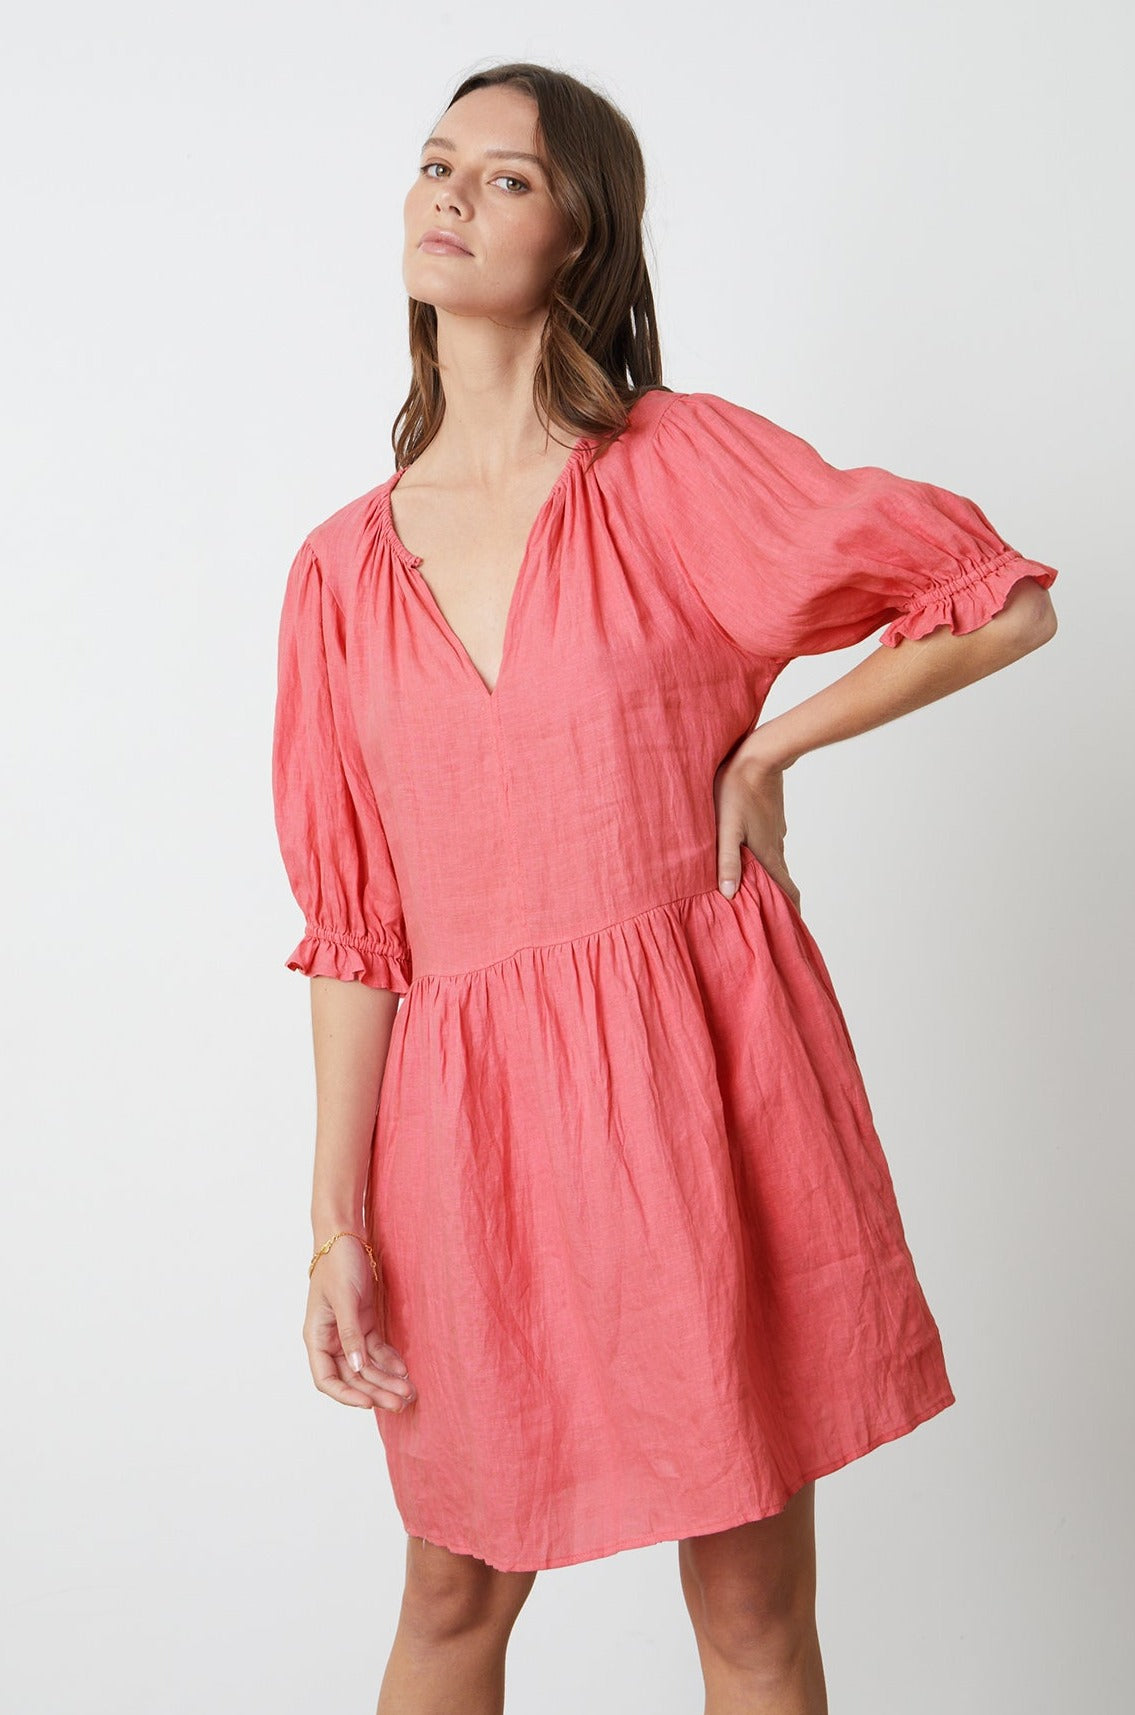 The model is wearing a Velvet by Graham & Spencer KAILANI LINEN PUFF SLEEVE DRESS with ruffled sleeves.-26342704382145